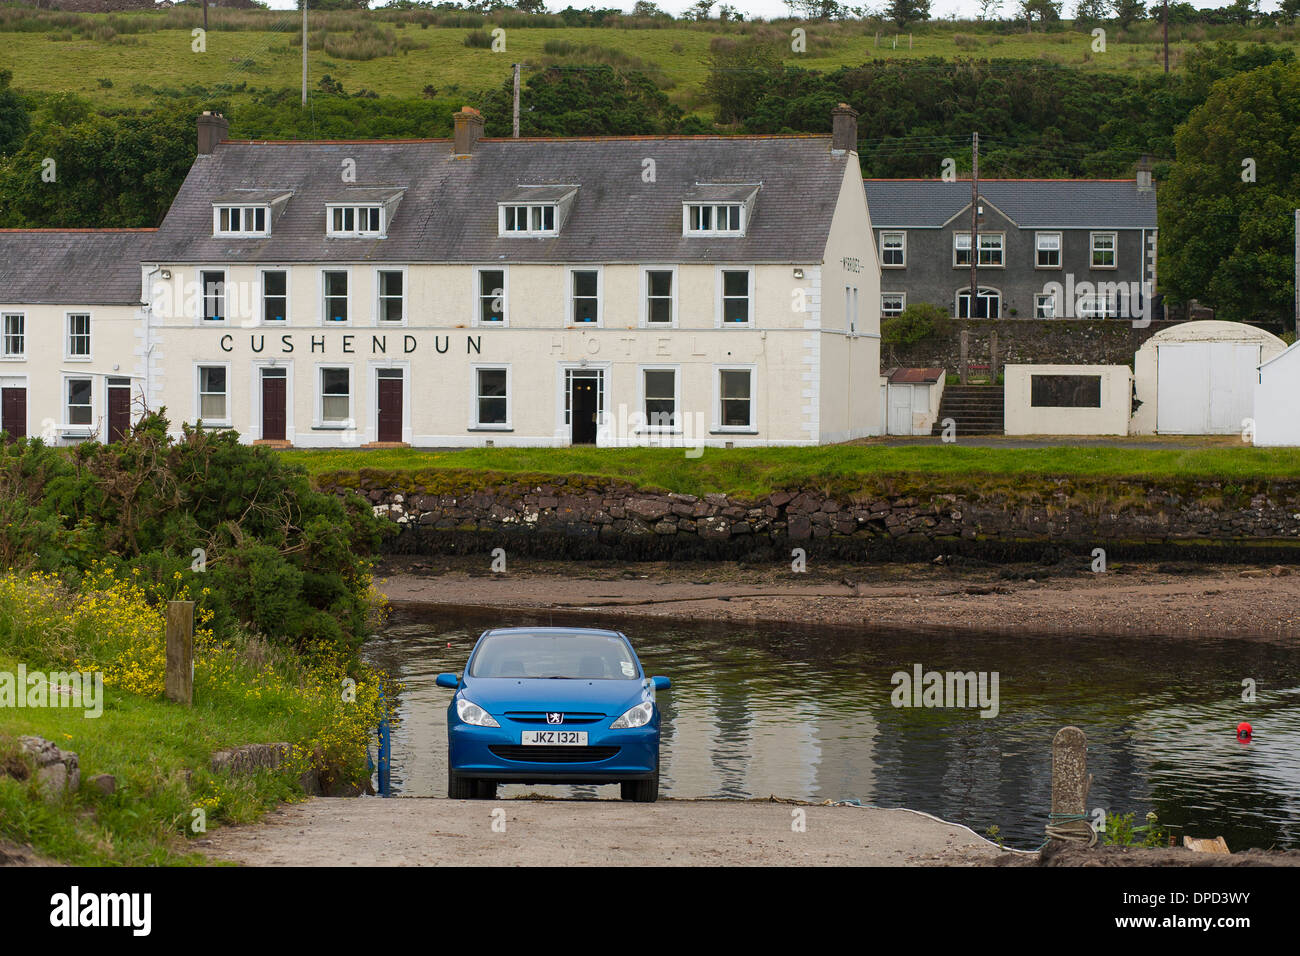 A blue car launches a boat from the boat ramp opposite the Cushendun Hotel on the River Dun in County Antrim Stock Photo